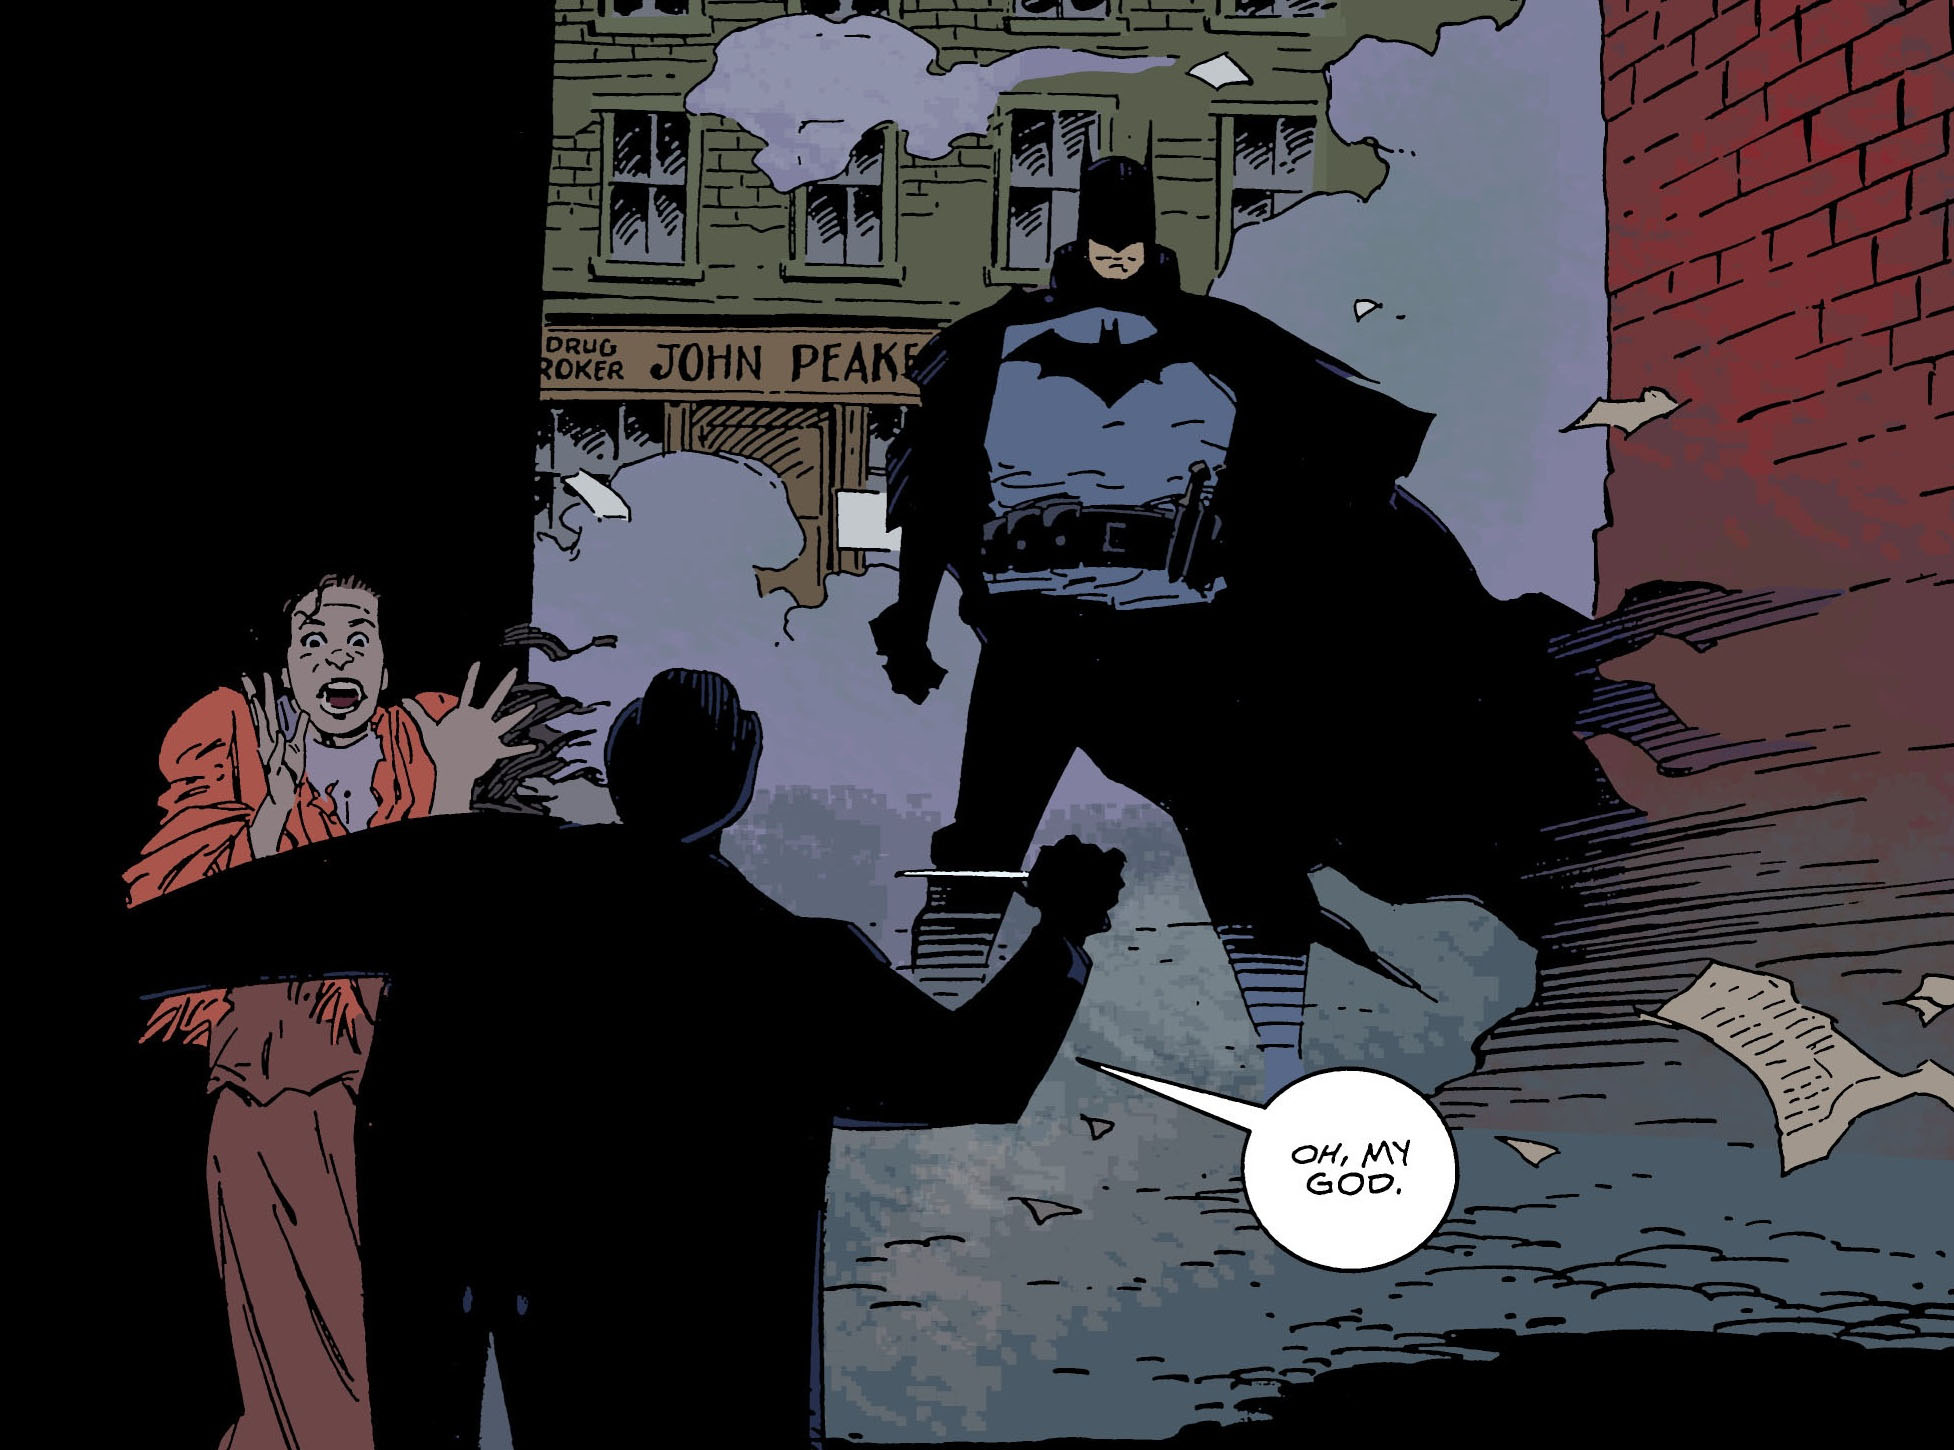 What You Need to Know About 'Batman: Gotham by Gaslight'